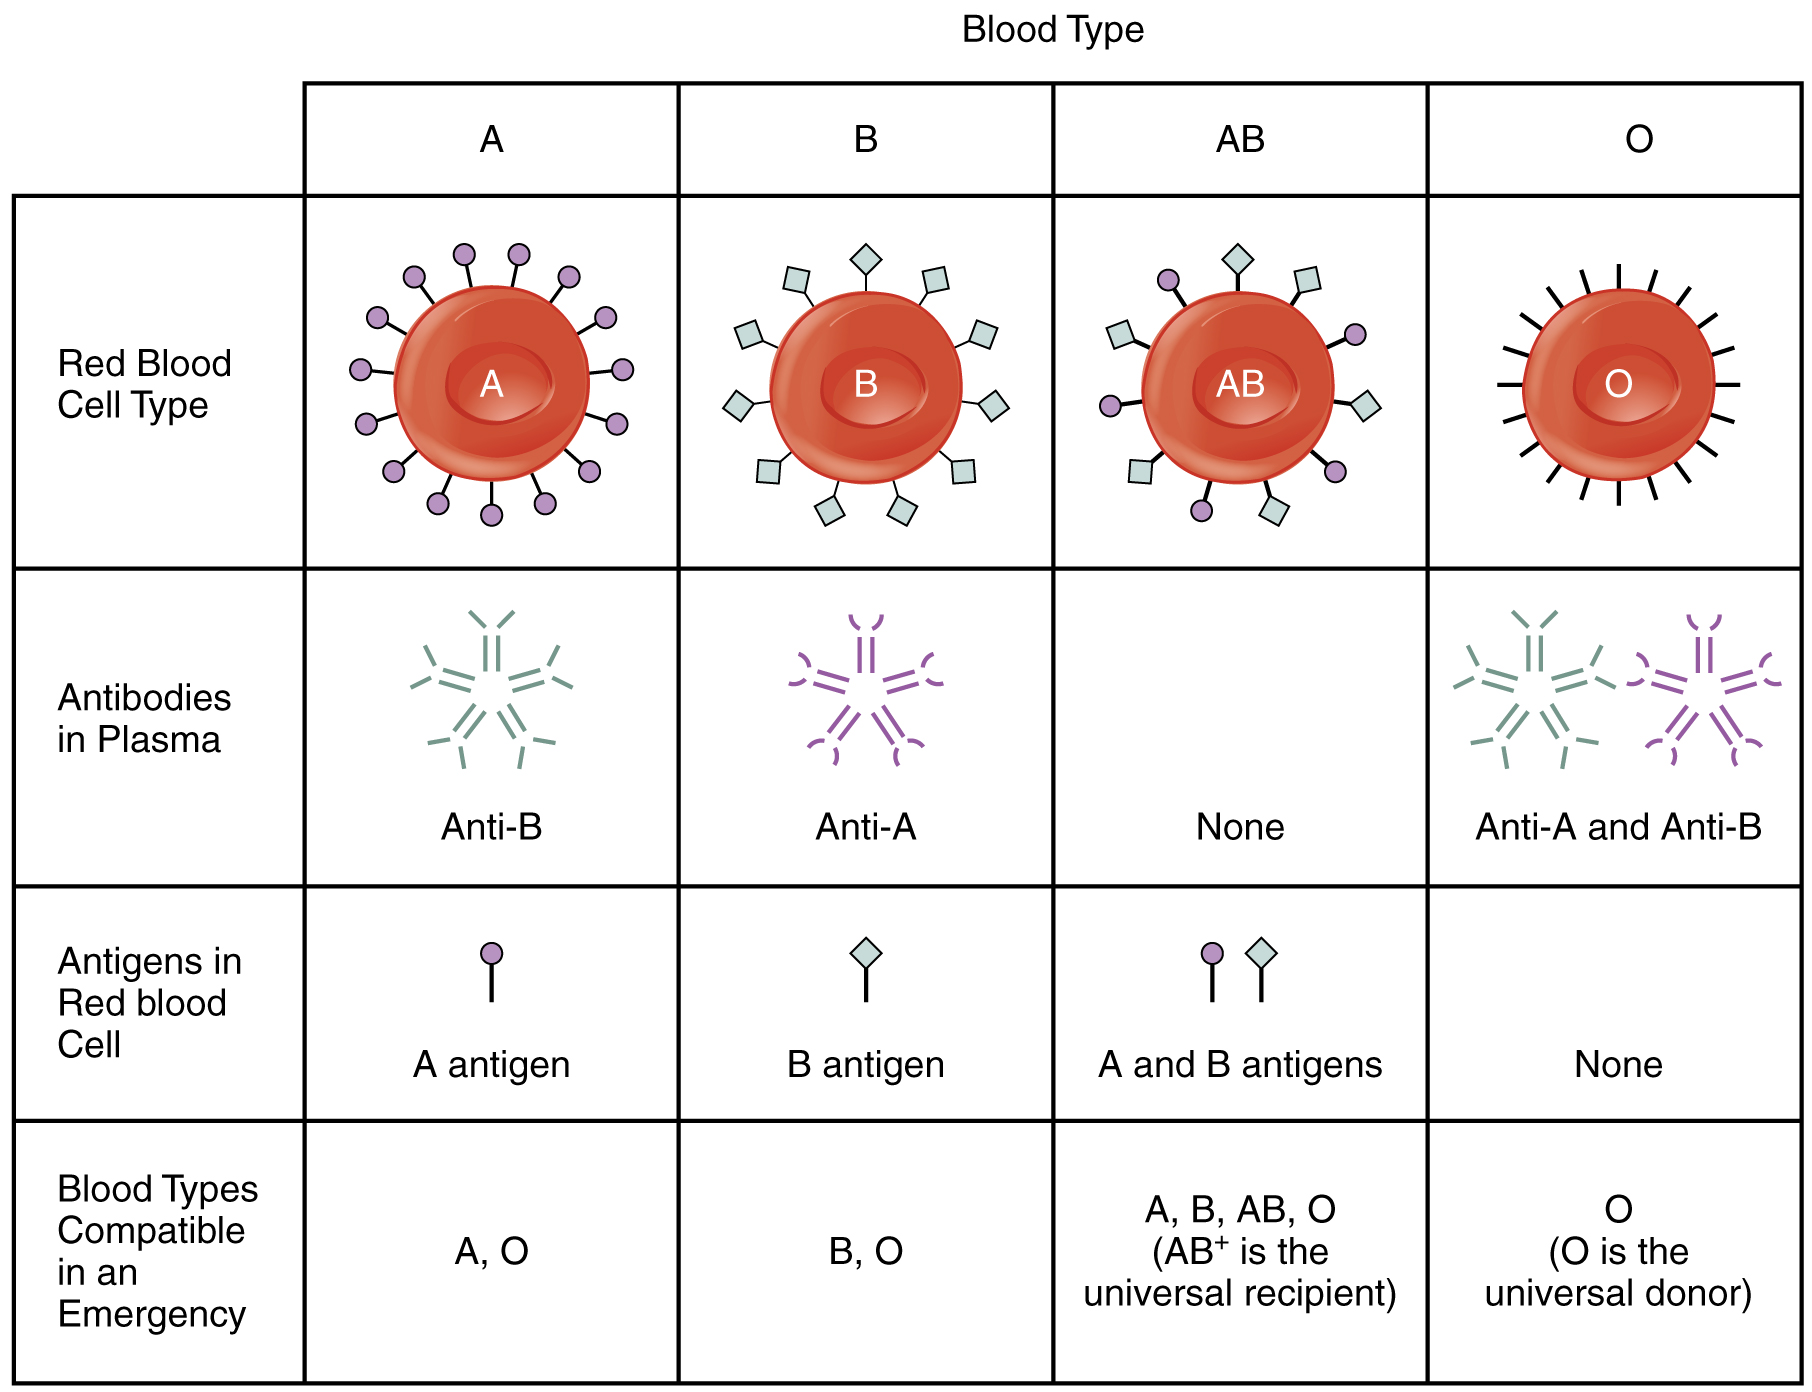 This table shows the different blood types, the antibodies in plasma, the antigens in the red blood cell, and the blood compatible blood types in an emergency. Table described in text below figure..